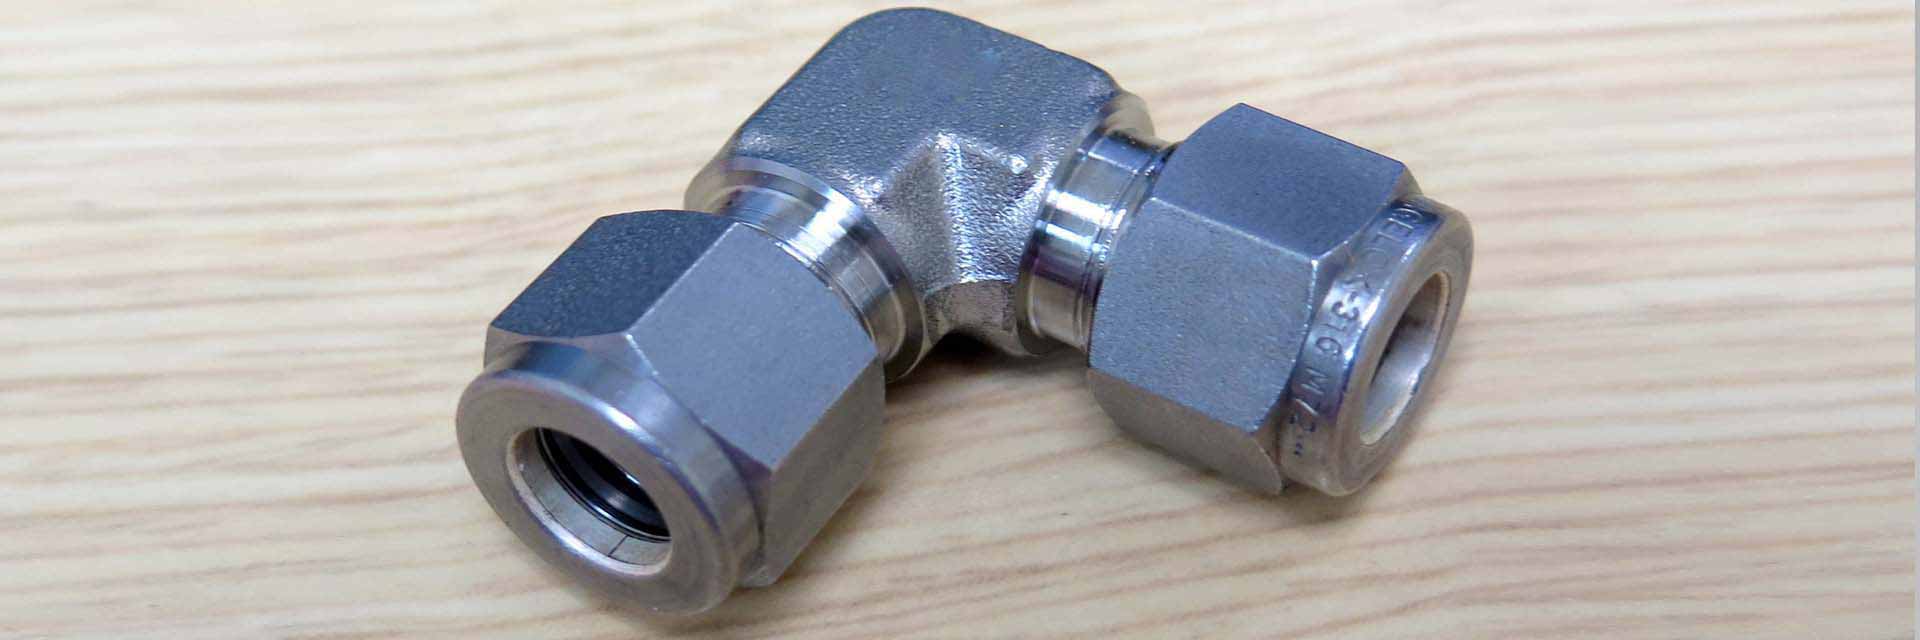 Union Elbow - Stainless Steel Union Elbow Manufacturer from Ahmedabad